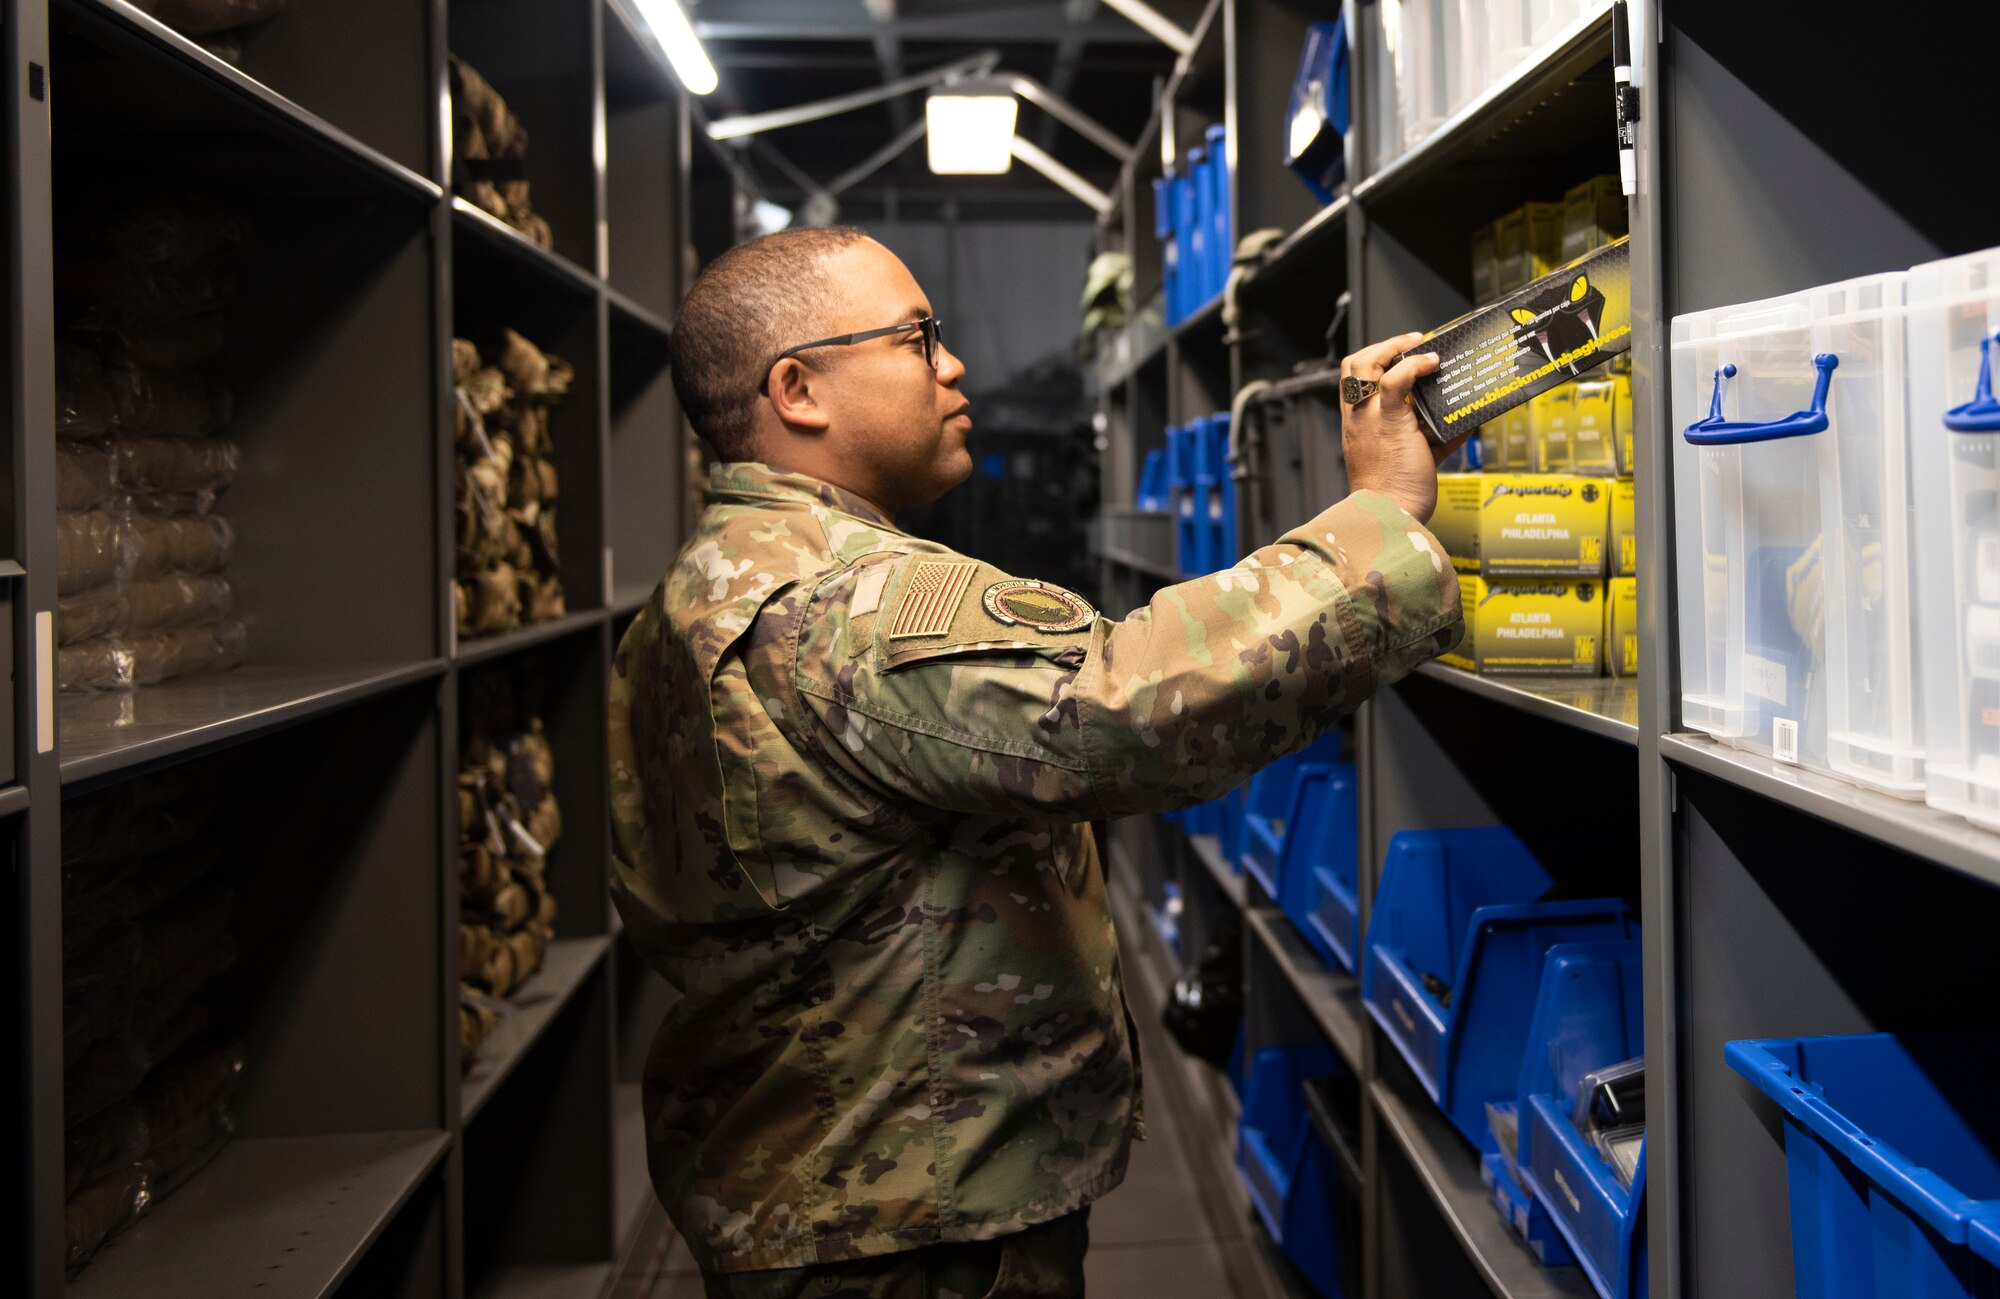 Tech. Sgt. Rashan Taggart, 48th Security Forces Squadron supply warehouse noncommissioned officer in charge, places boxes of latex gloves on a shelf at Royal Air Force Lakenheath, England, April 16, 2020. With an increased need for personal protective equipment and sanitizing products, monitoring supply and demand are crucial to ensure that squadron Airmen have critical items required to safely execute the mission. (U.S. Air Force photo by Airman 1st Class Jessi Monte)